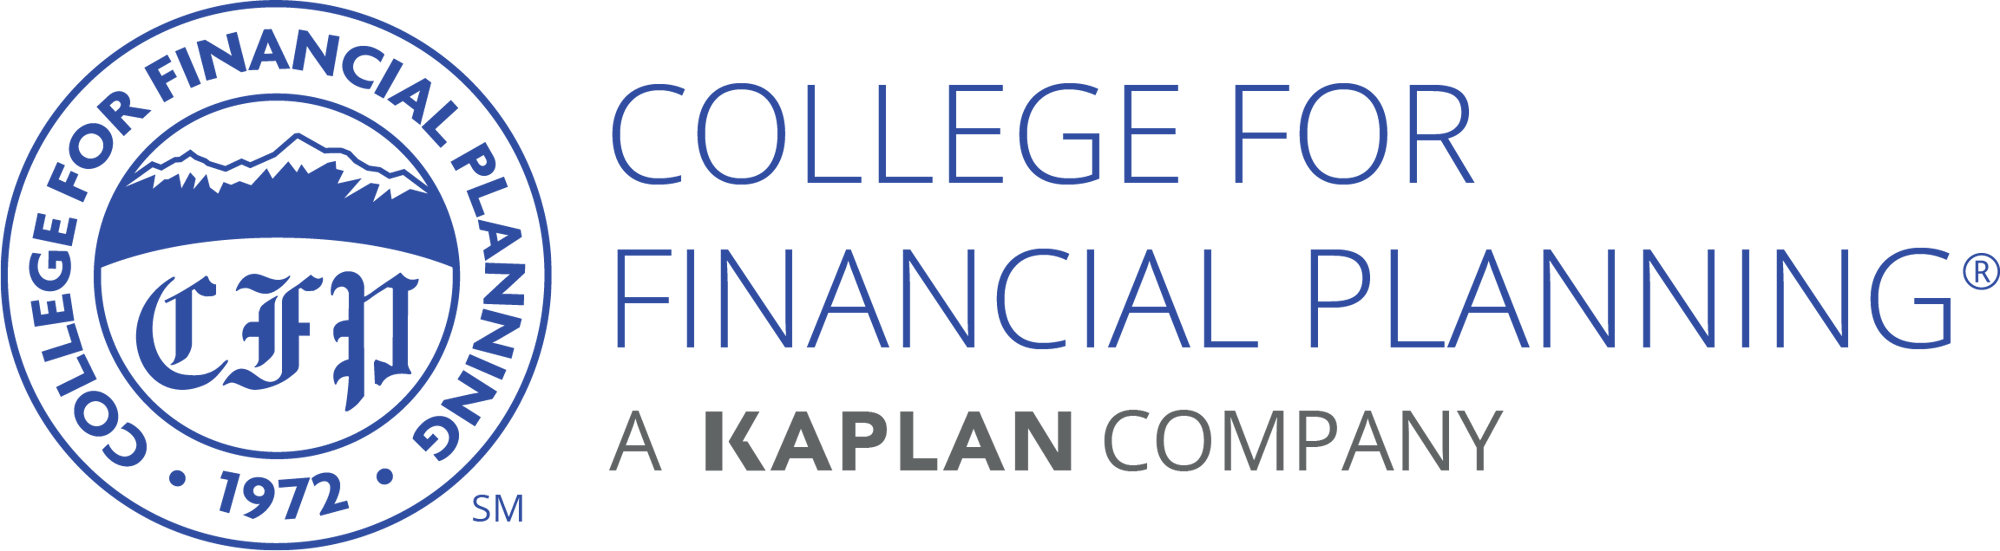 College for Finanical Planning - Kaplan 